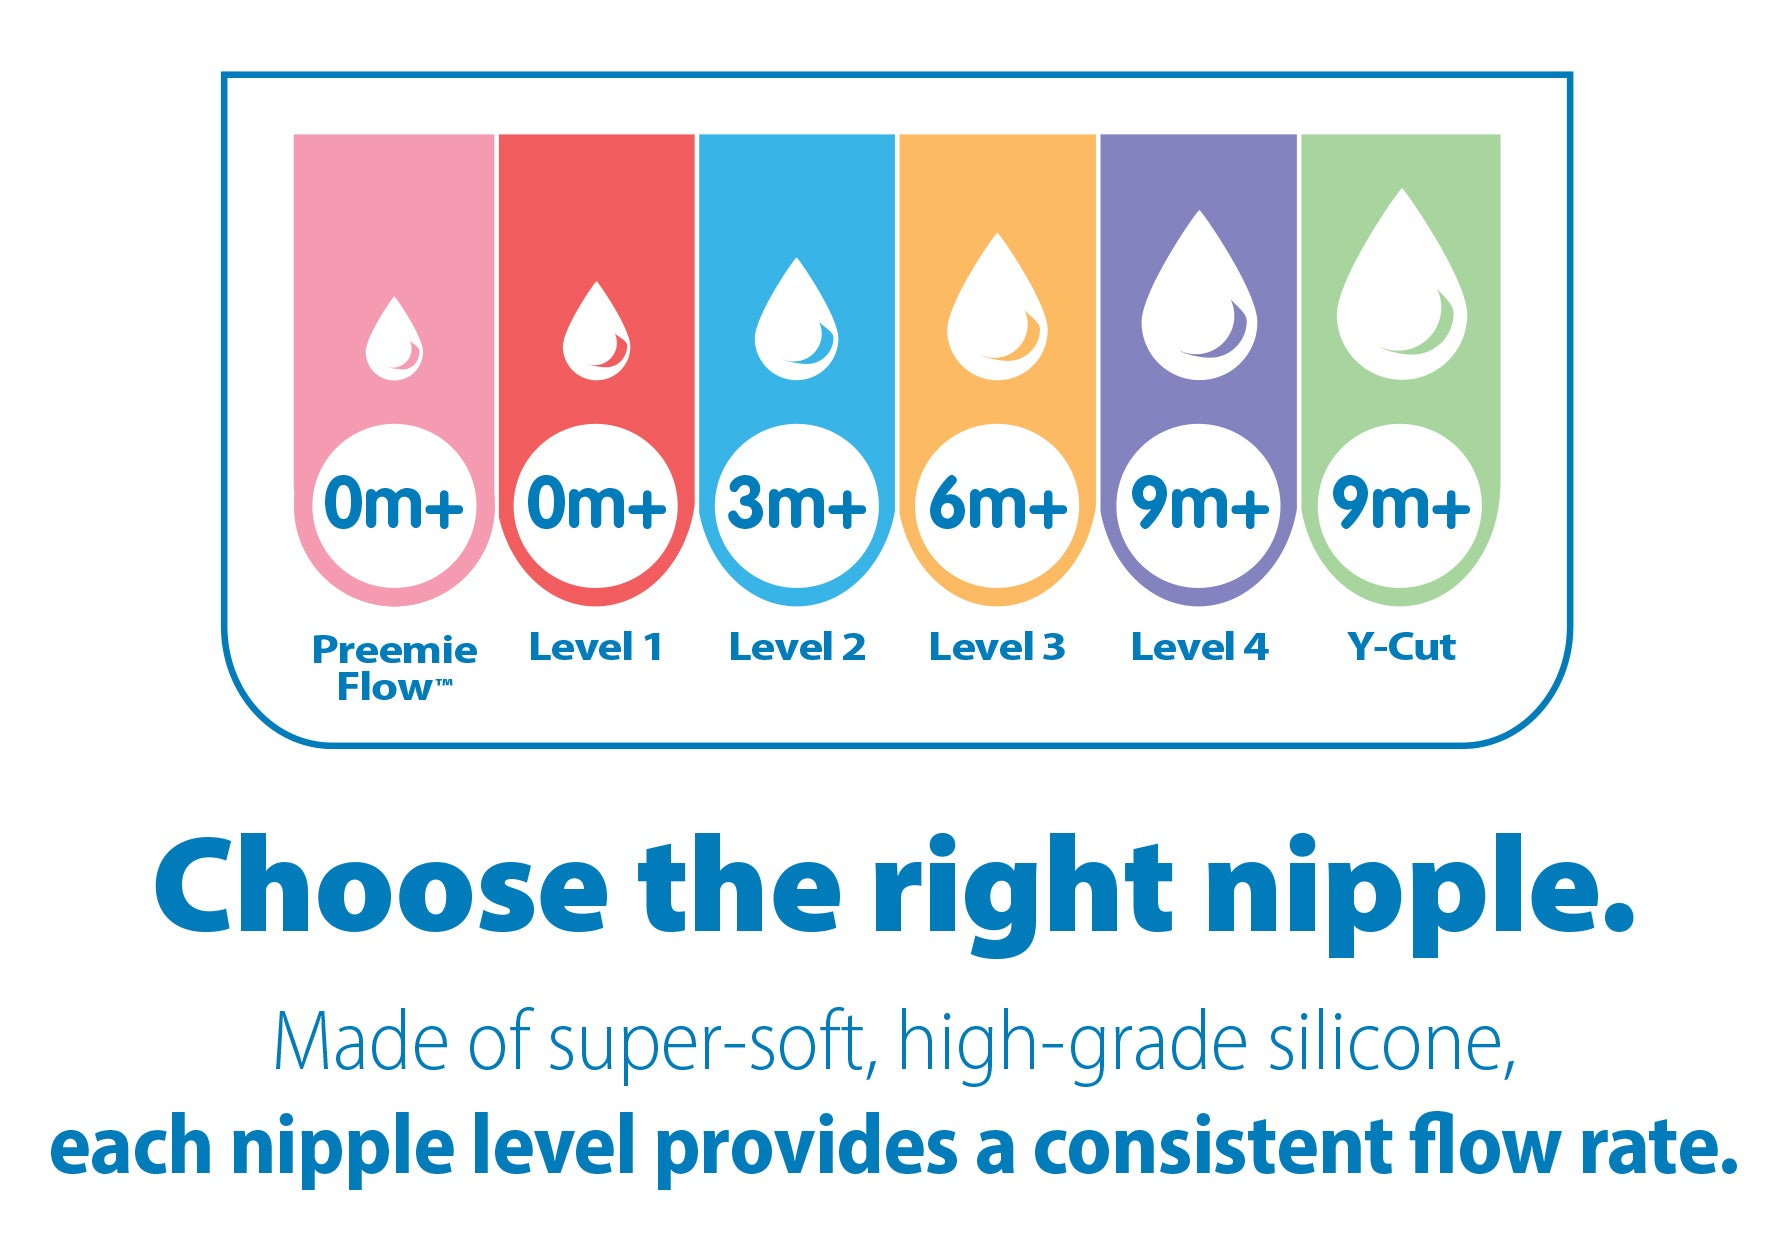 Dr. Brown's Level 4 Wide-Neck Silicone Nipple